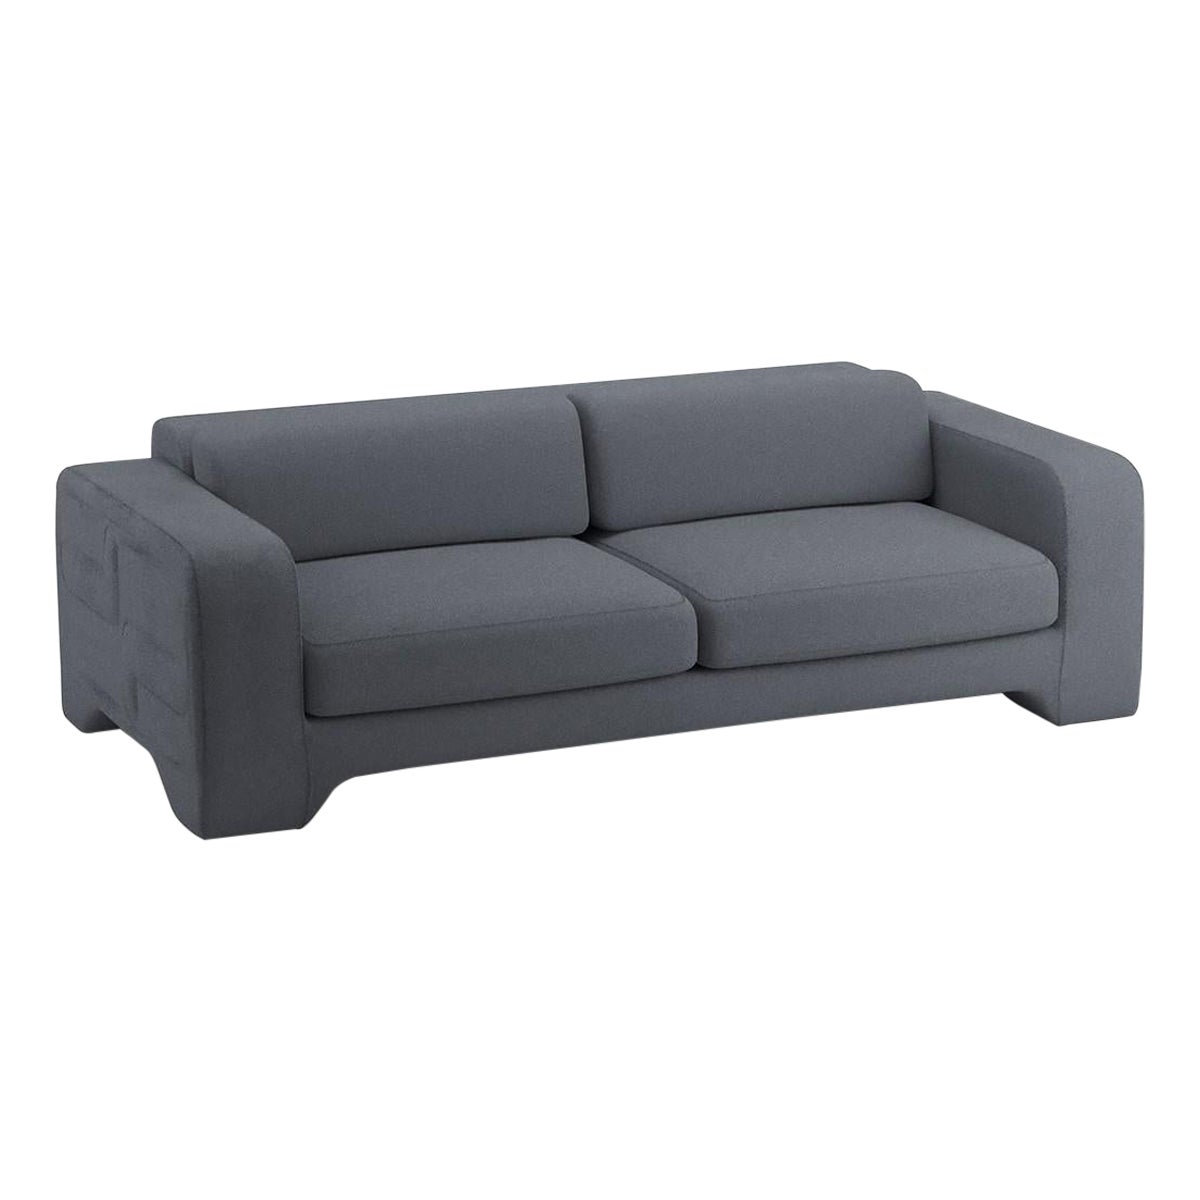 Popus Editions Giovanna 2.5 Seater Sofa in Jade Cork Linen Upholstery For Sale